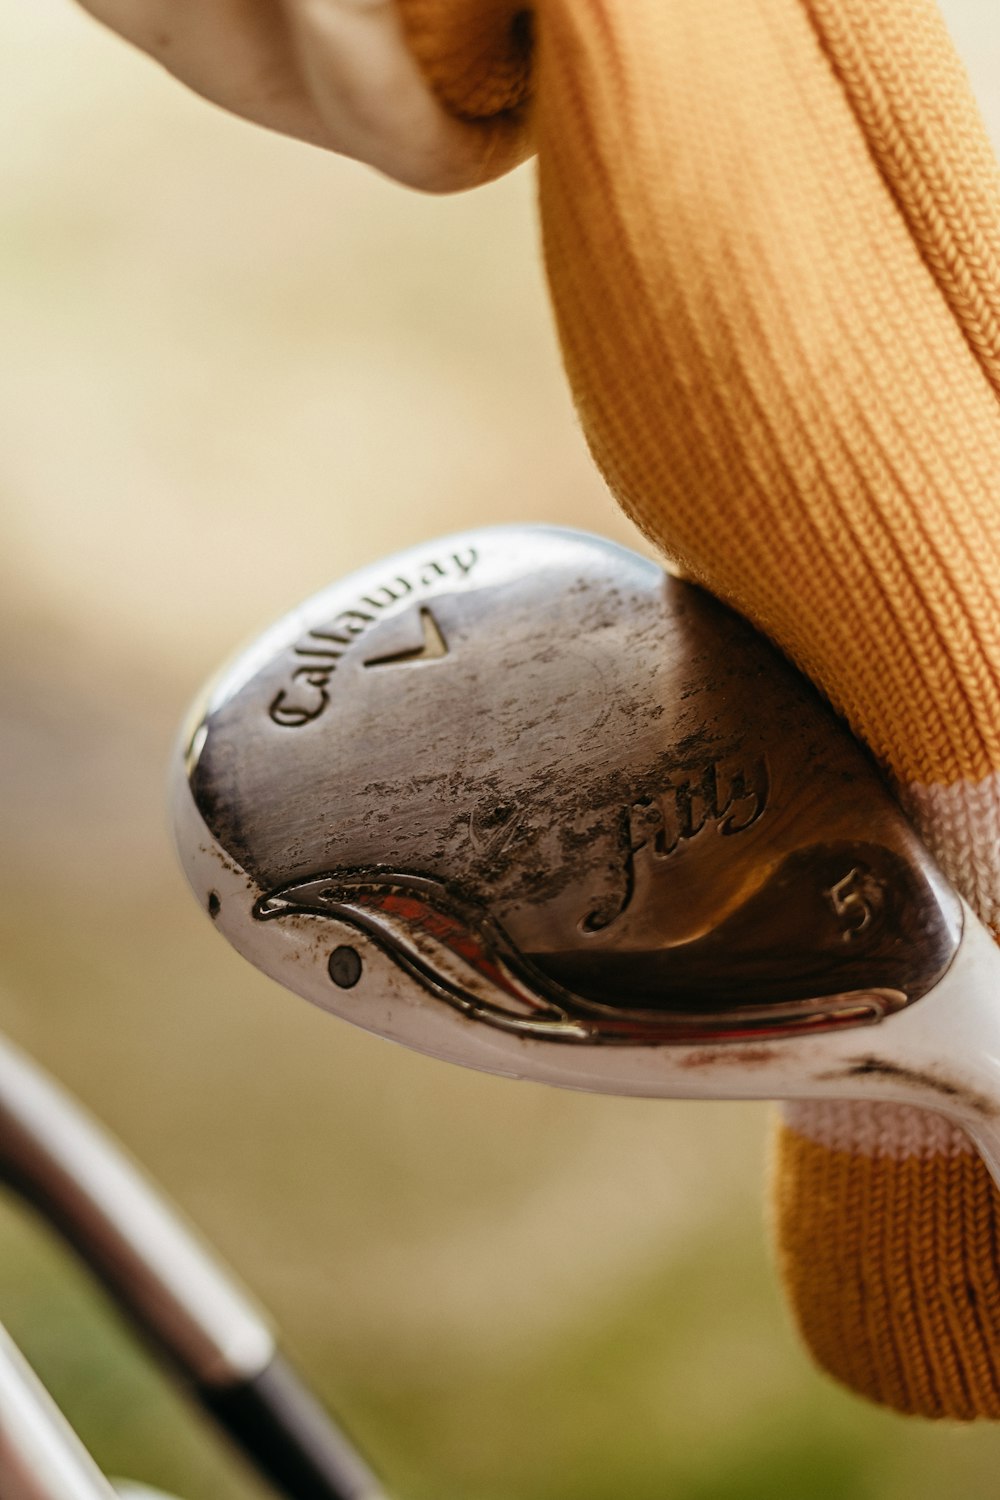 a close up of a golf club on a driver's driver's driver